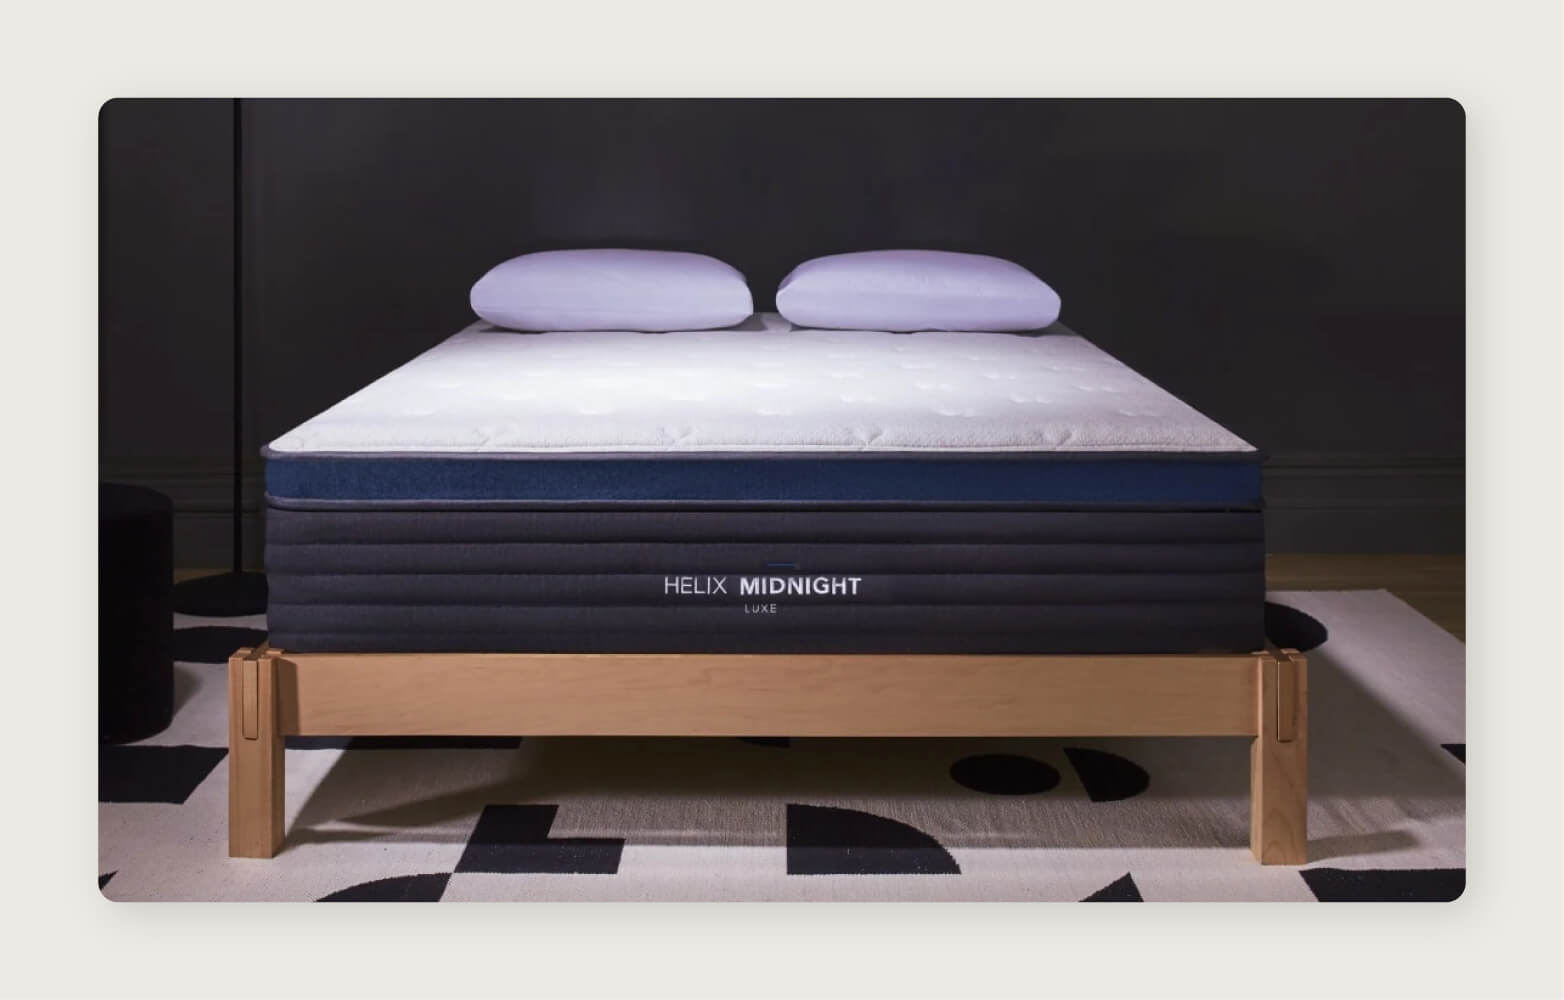 A Helix Midnight Luxe mattress with two pillows on a light wood platform bed frame in a dark room.